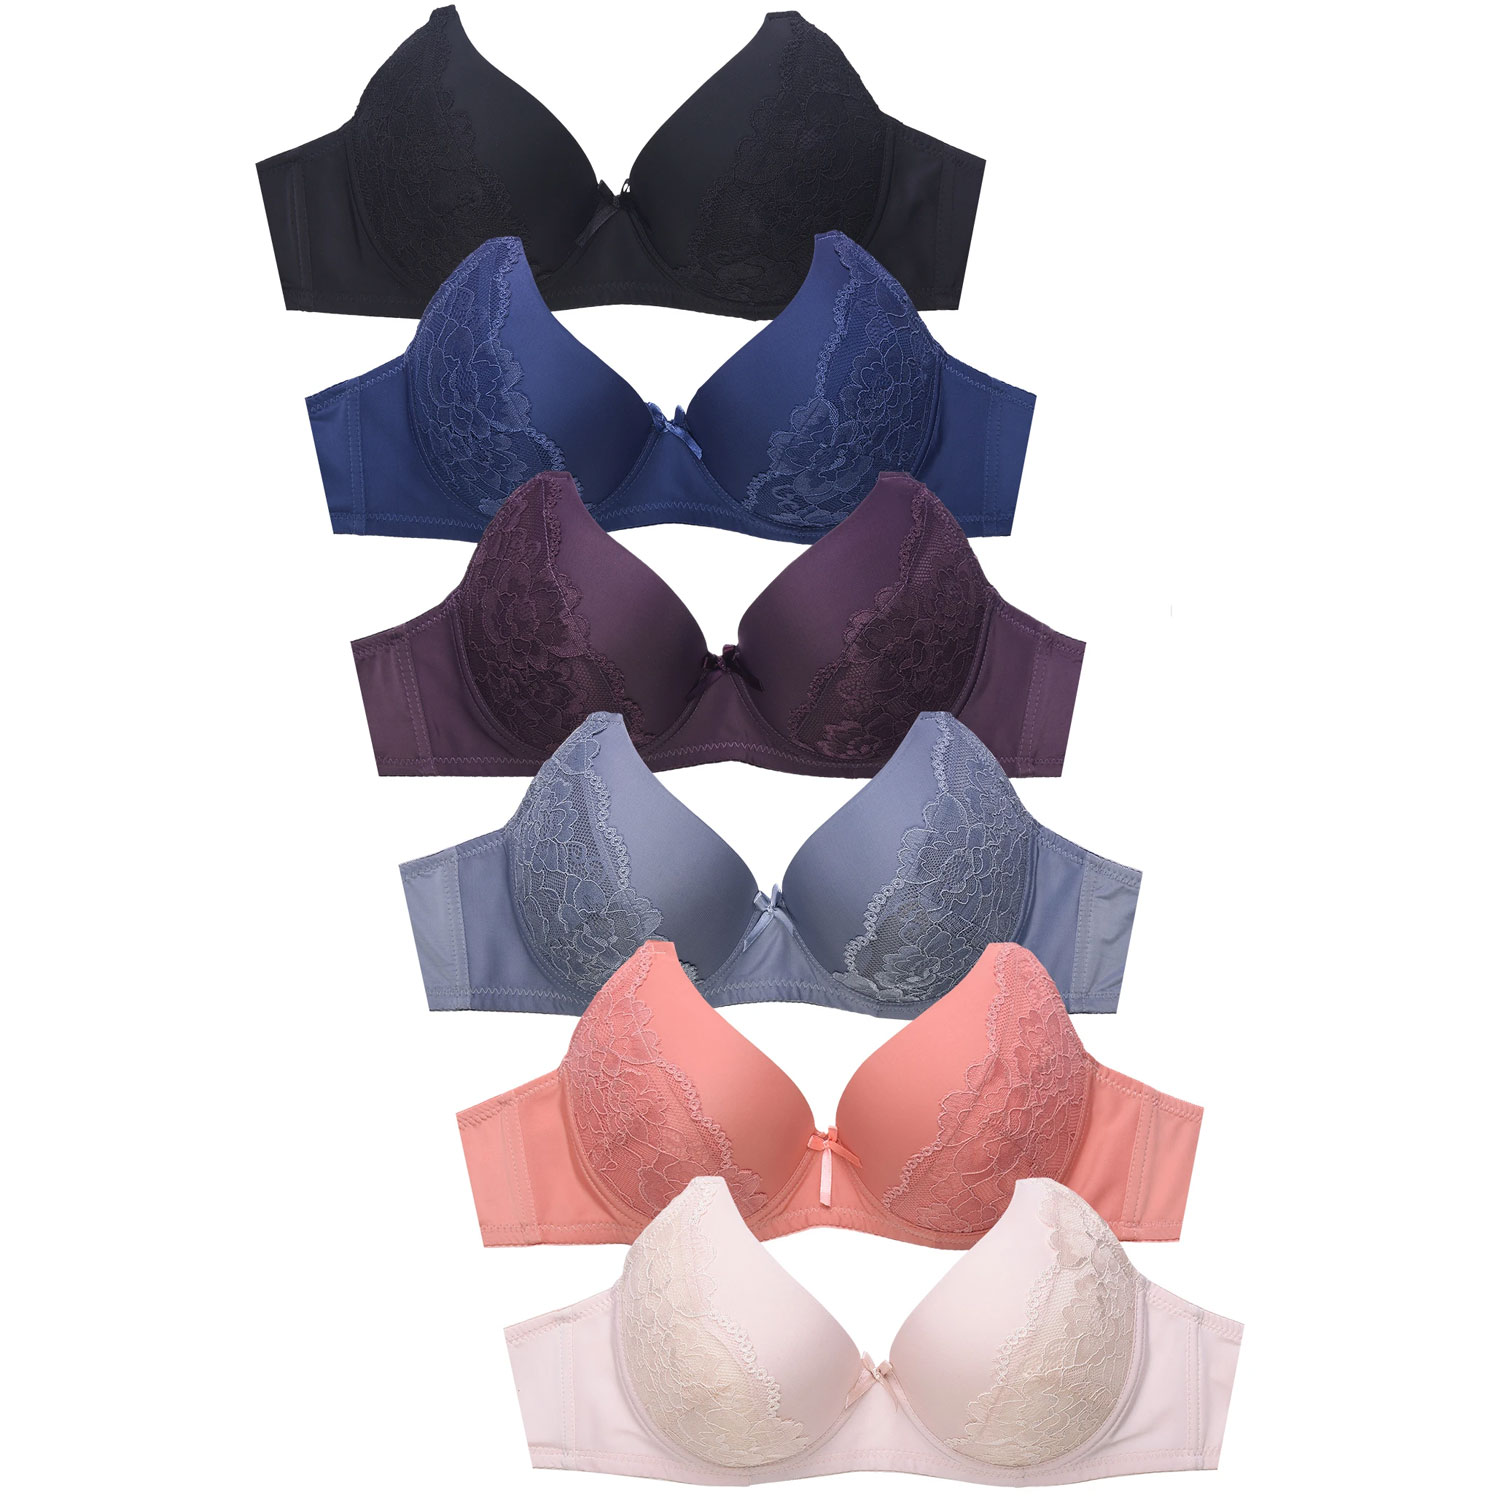 Ladies Full Cup Lace Bra - 6 Pack